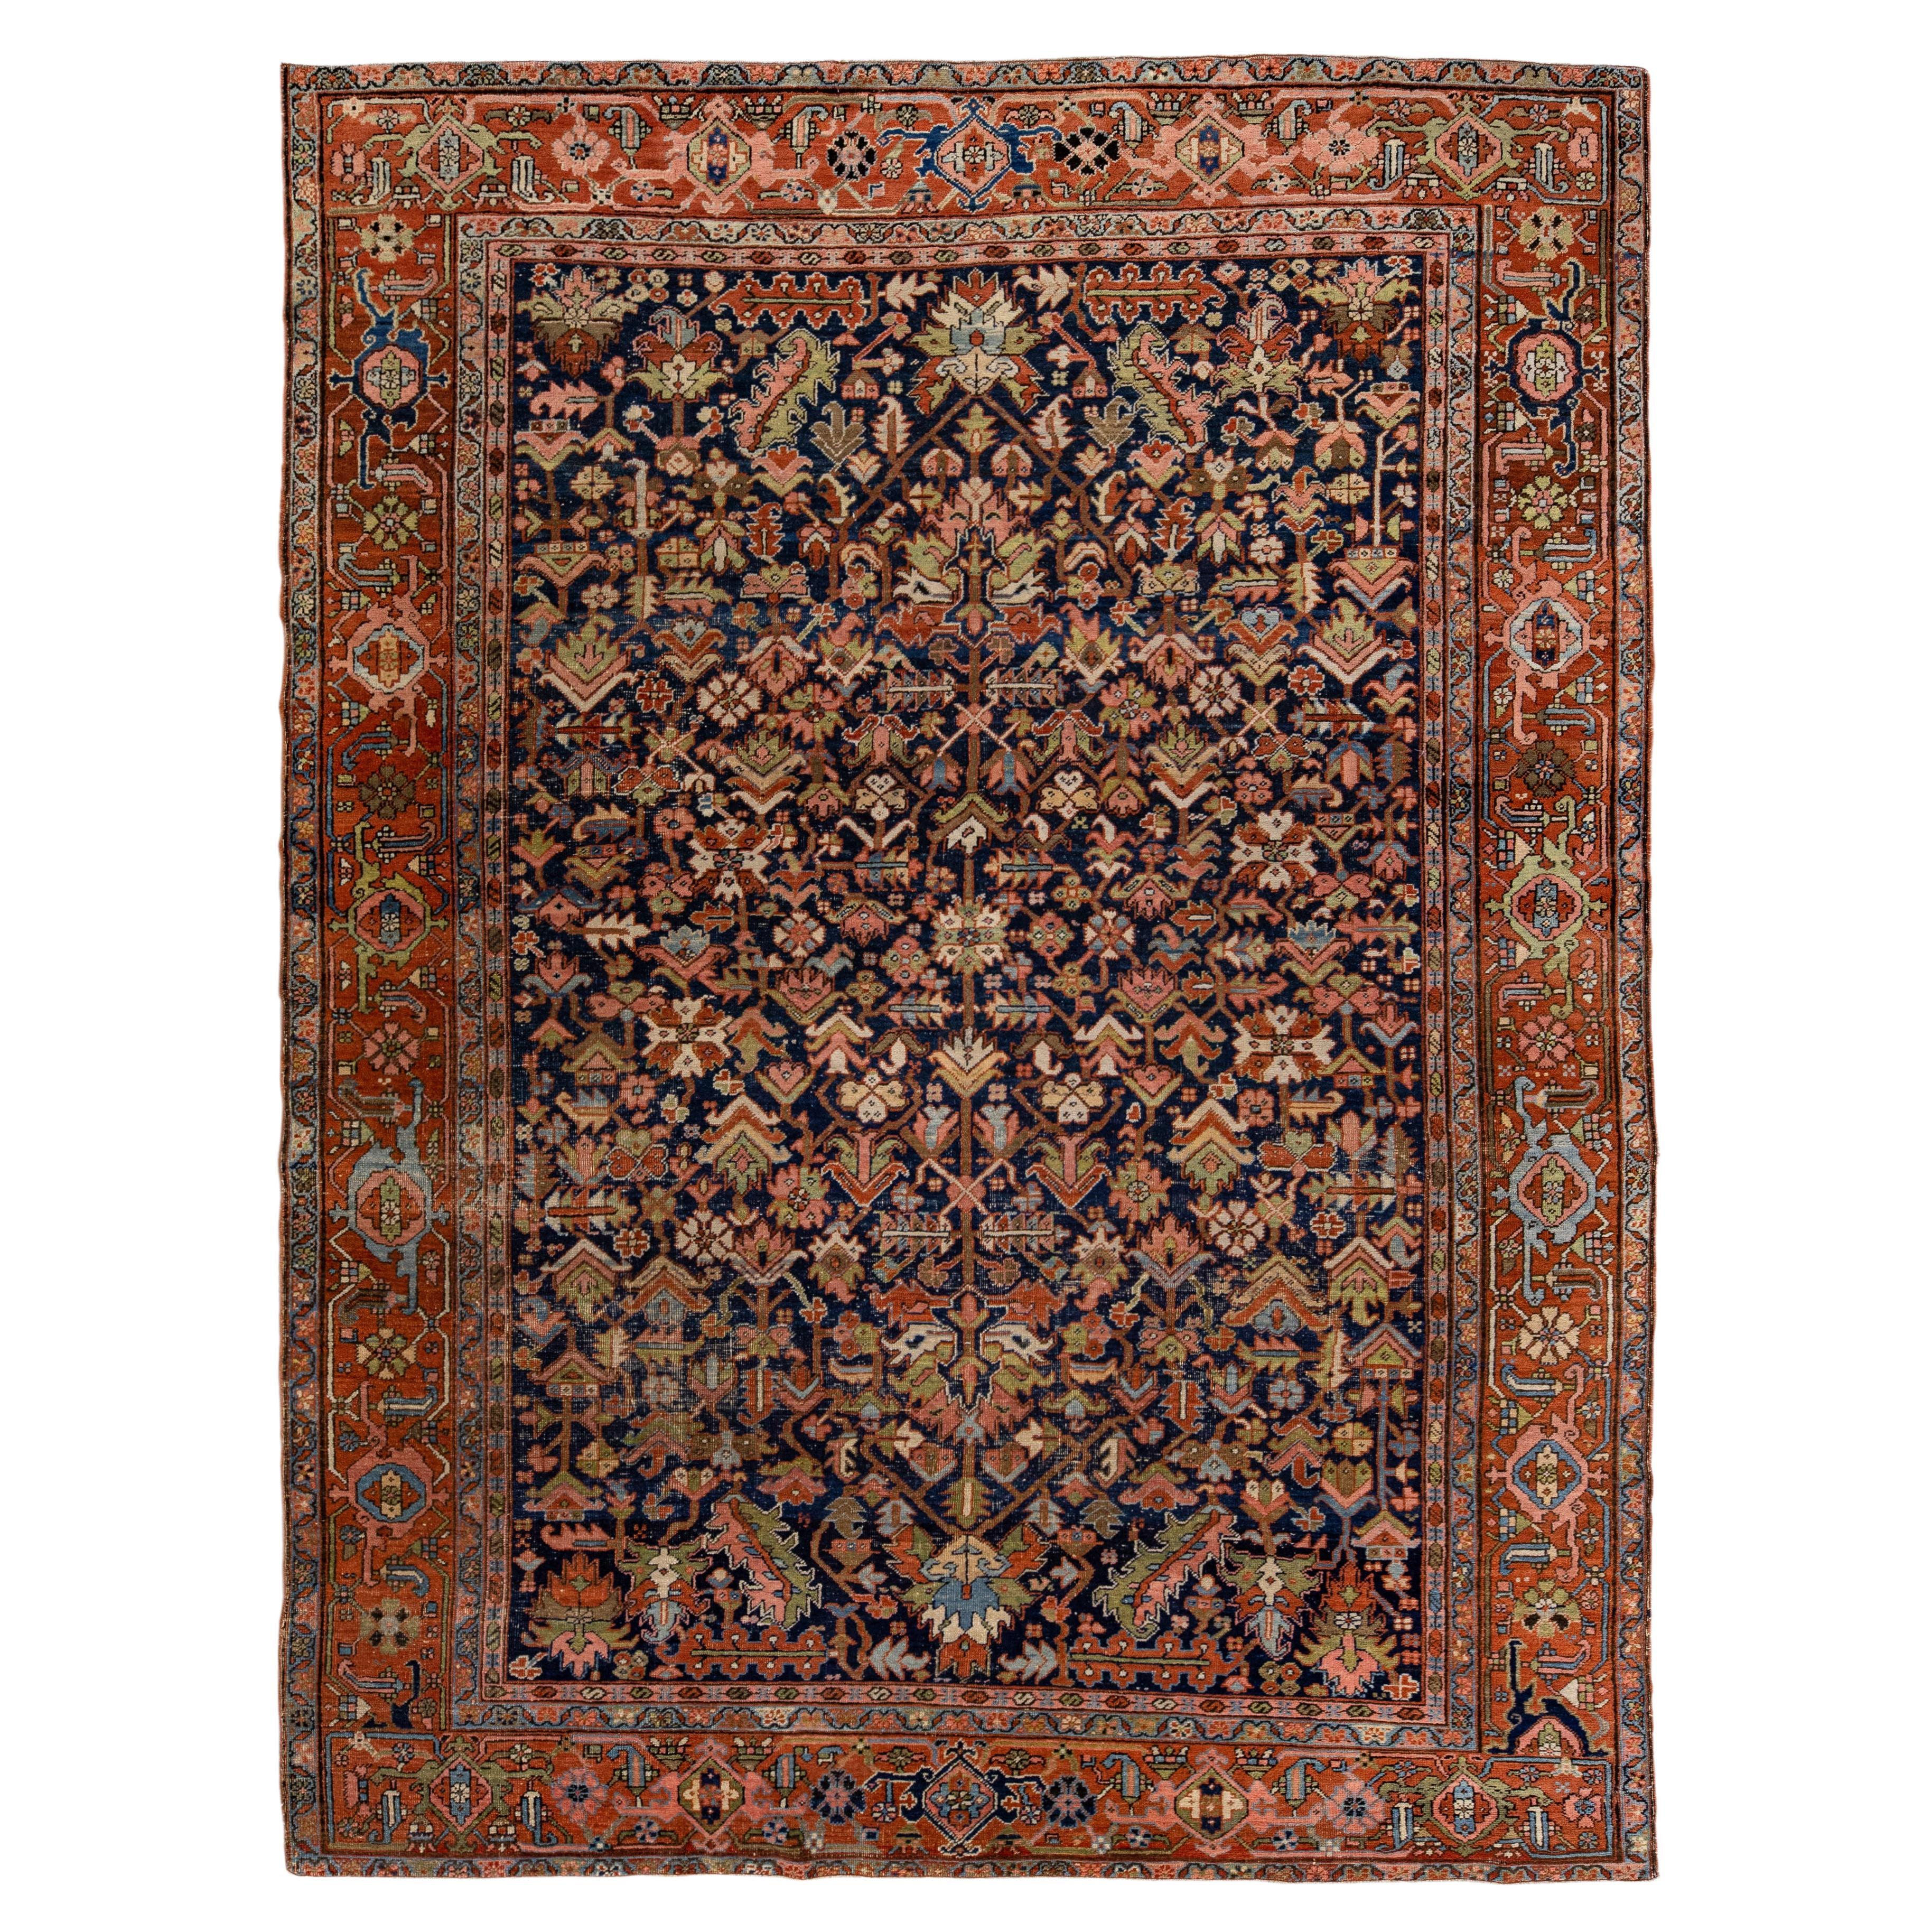 Blue Antique Persian Serapi Handmade Wool Rug with Allover Floral Pattern